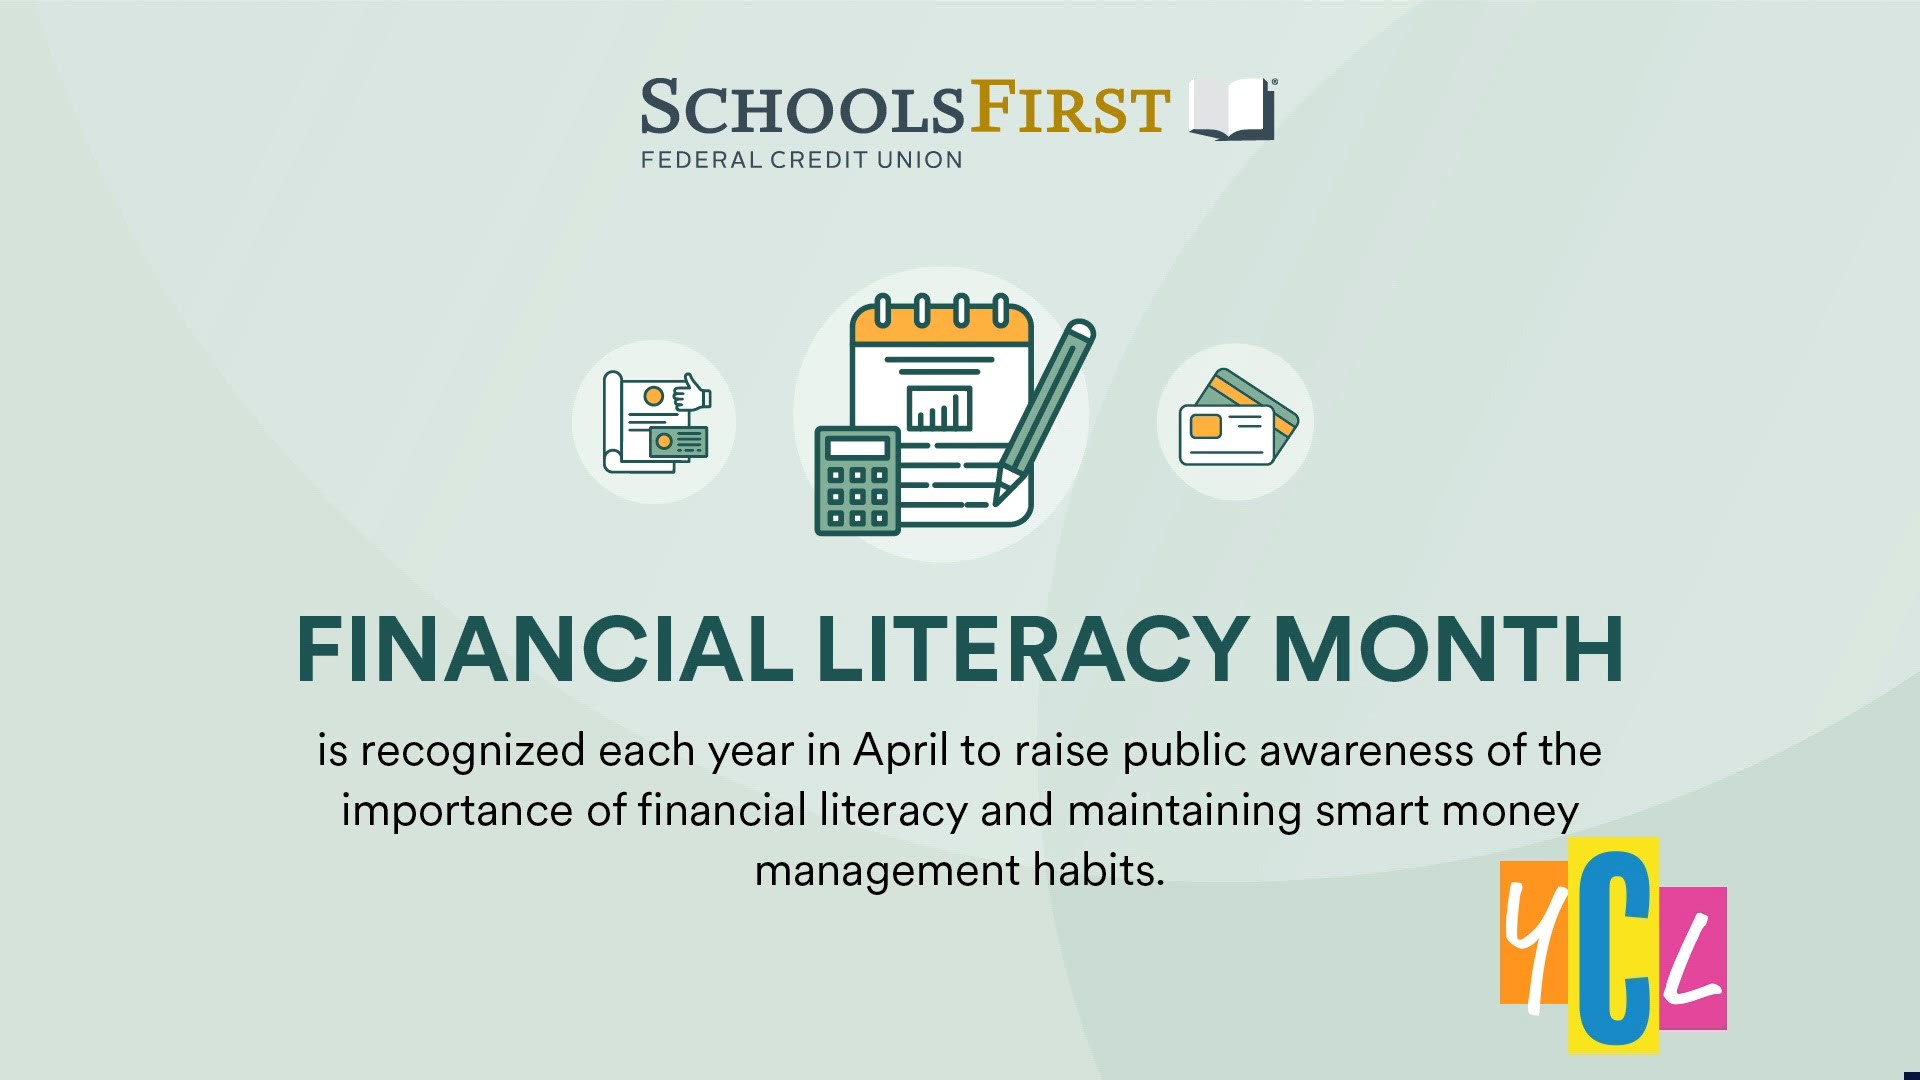 While we spring clean our homes, it's also a great time to check in on our money habits for Financial Literacy Month. This segment is sponsored by SchoolsFirst FCU.